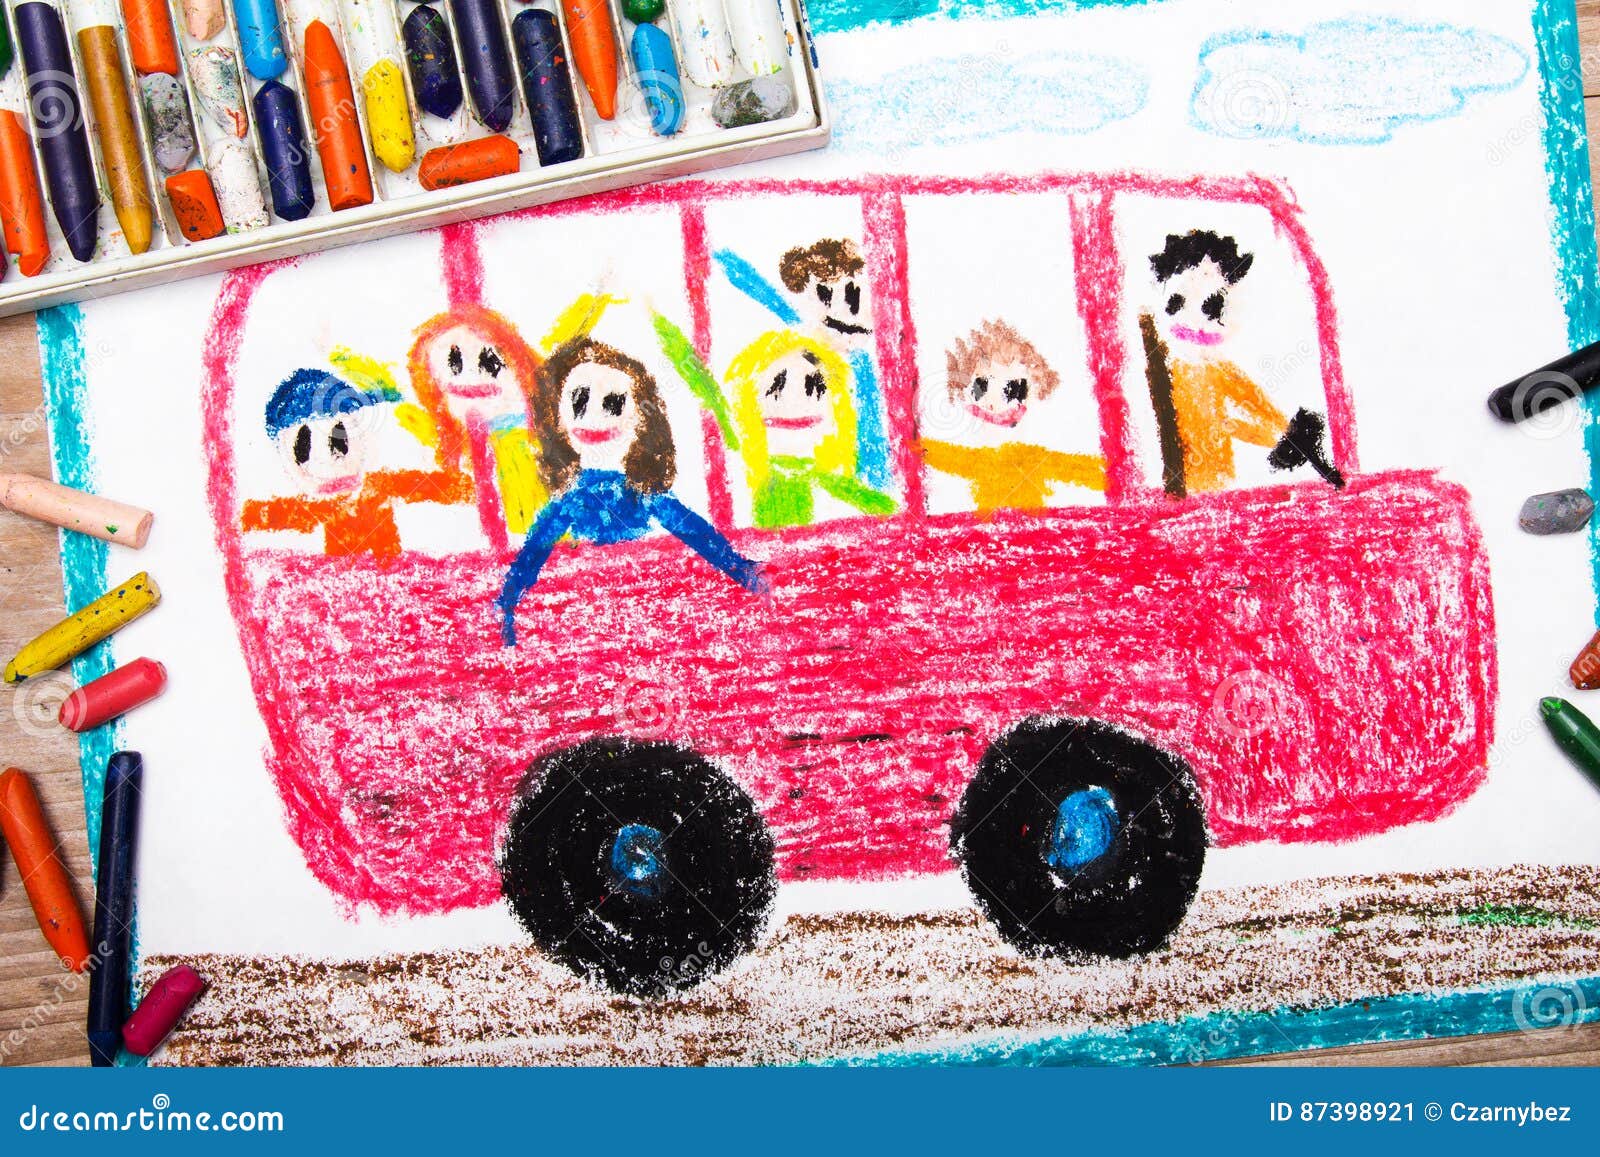 drawing-red-school-bus-happy-children-inside-colorful-87398921.jpg